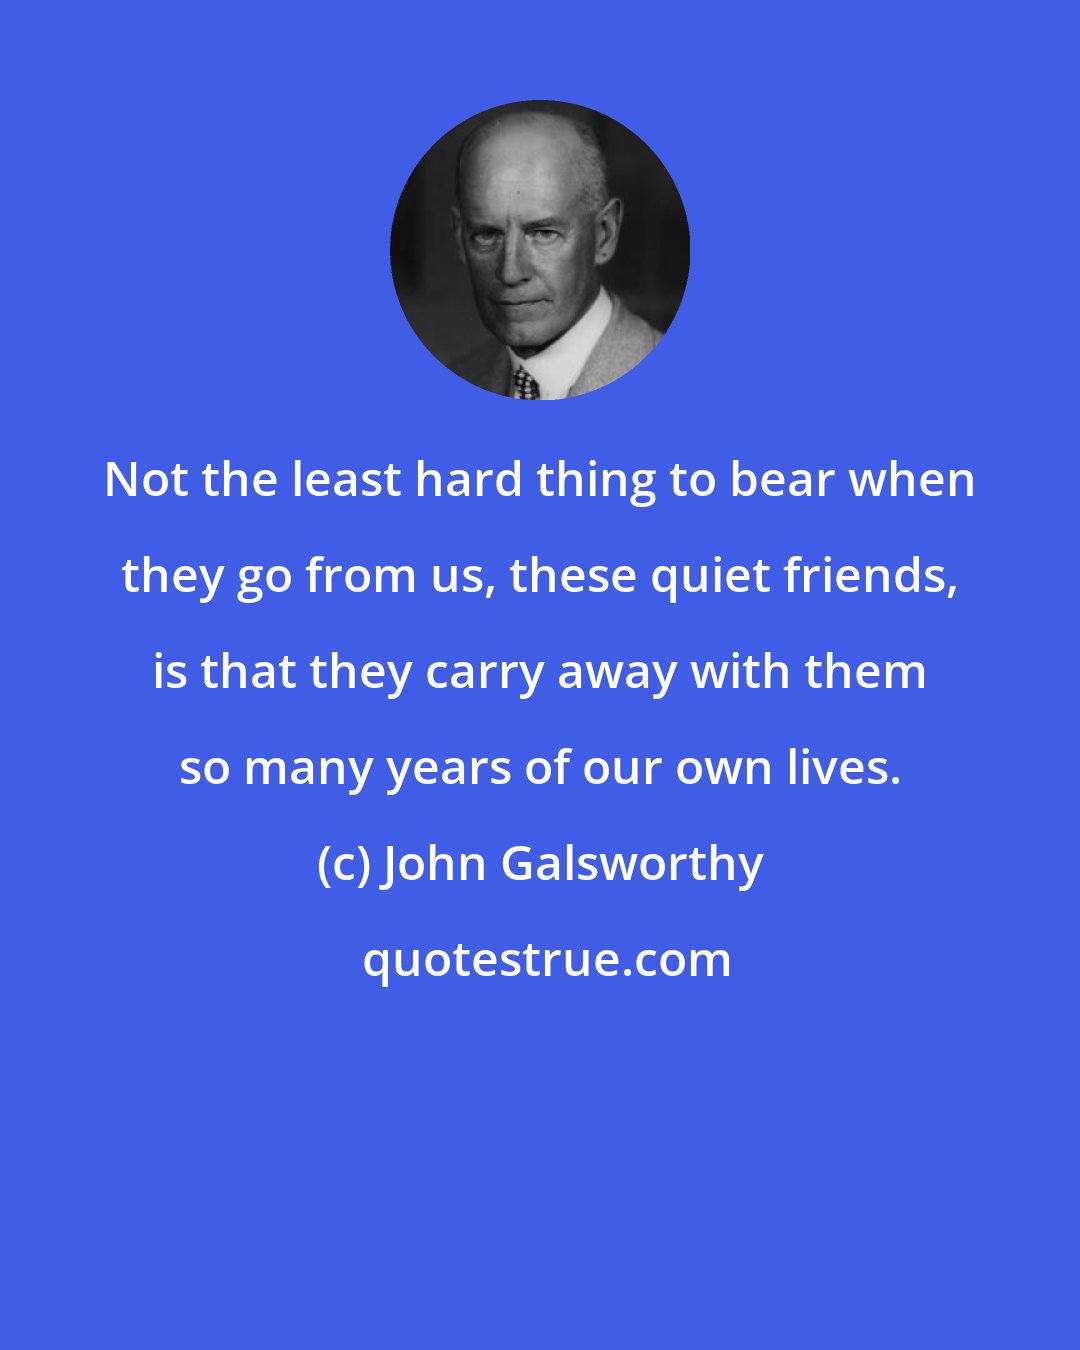 John Galsworthy: Not the least hard thing to bear when they go from us, these quiet friends, is that they carry away with them so many years of our own lives.